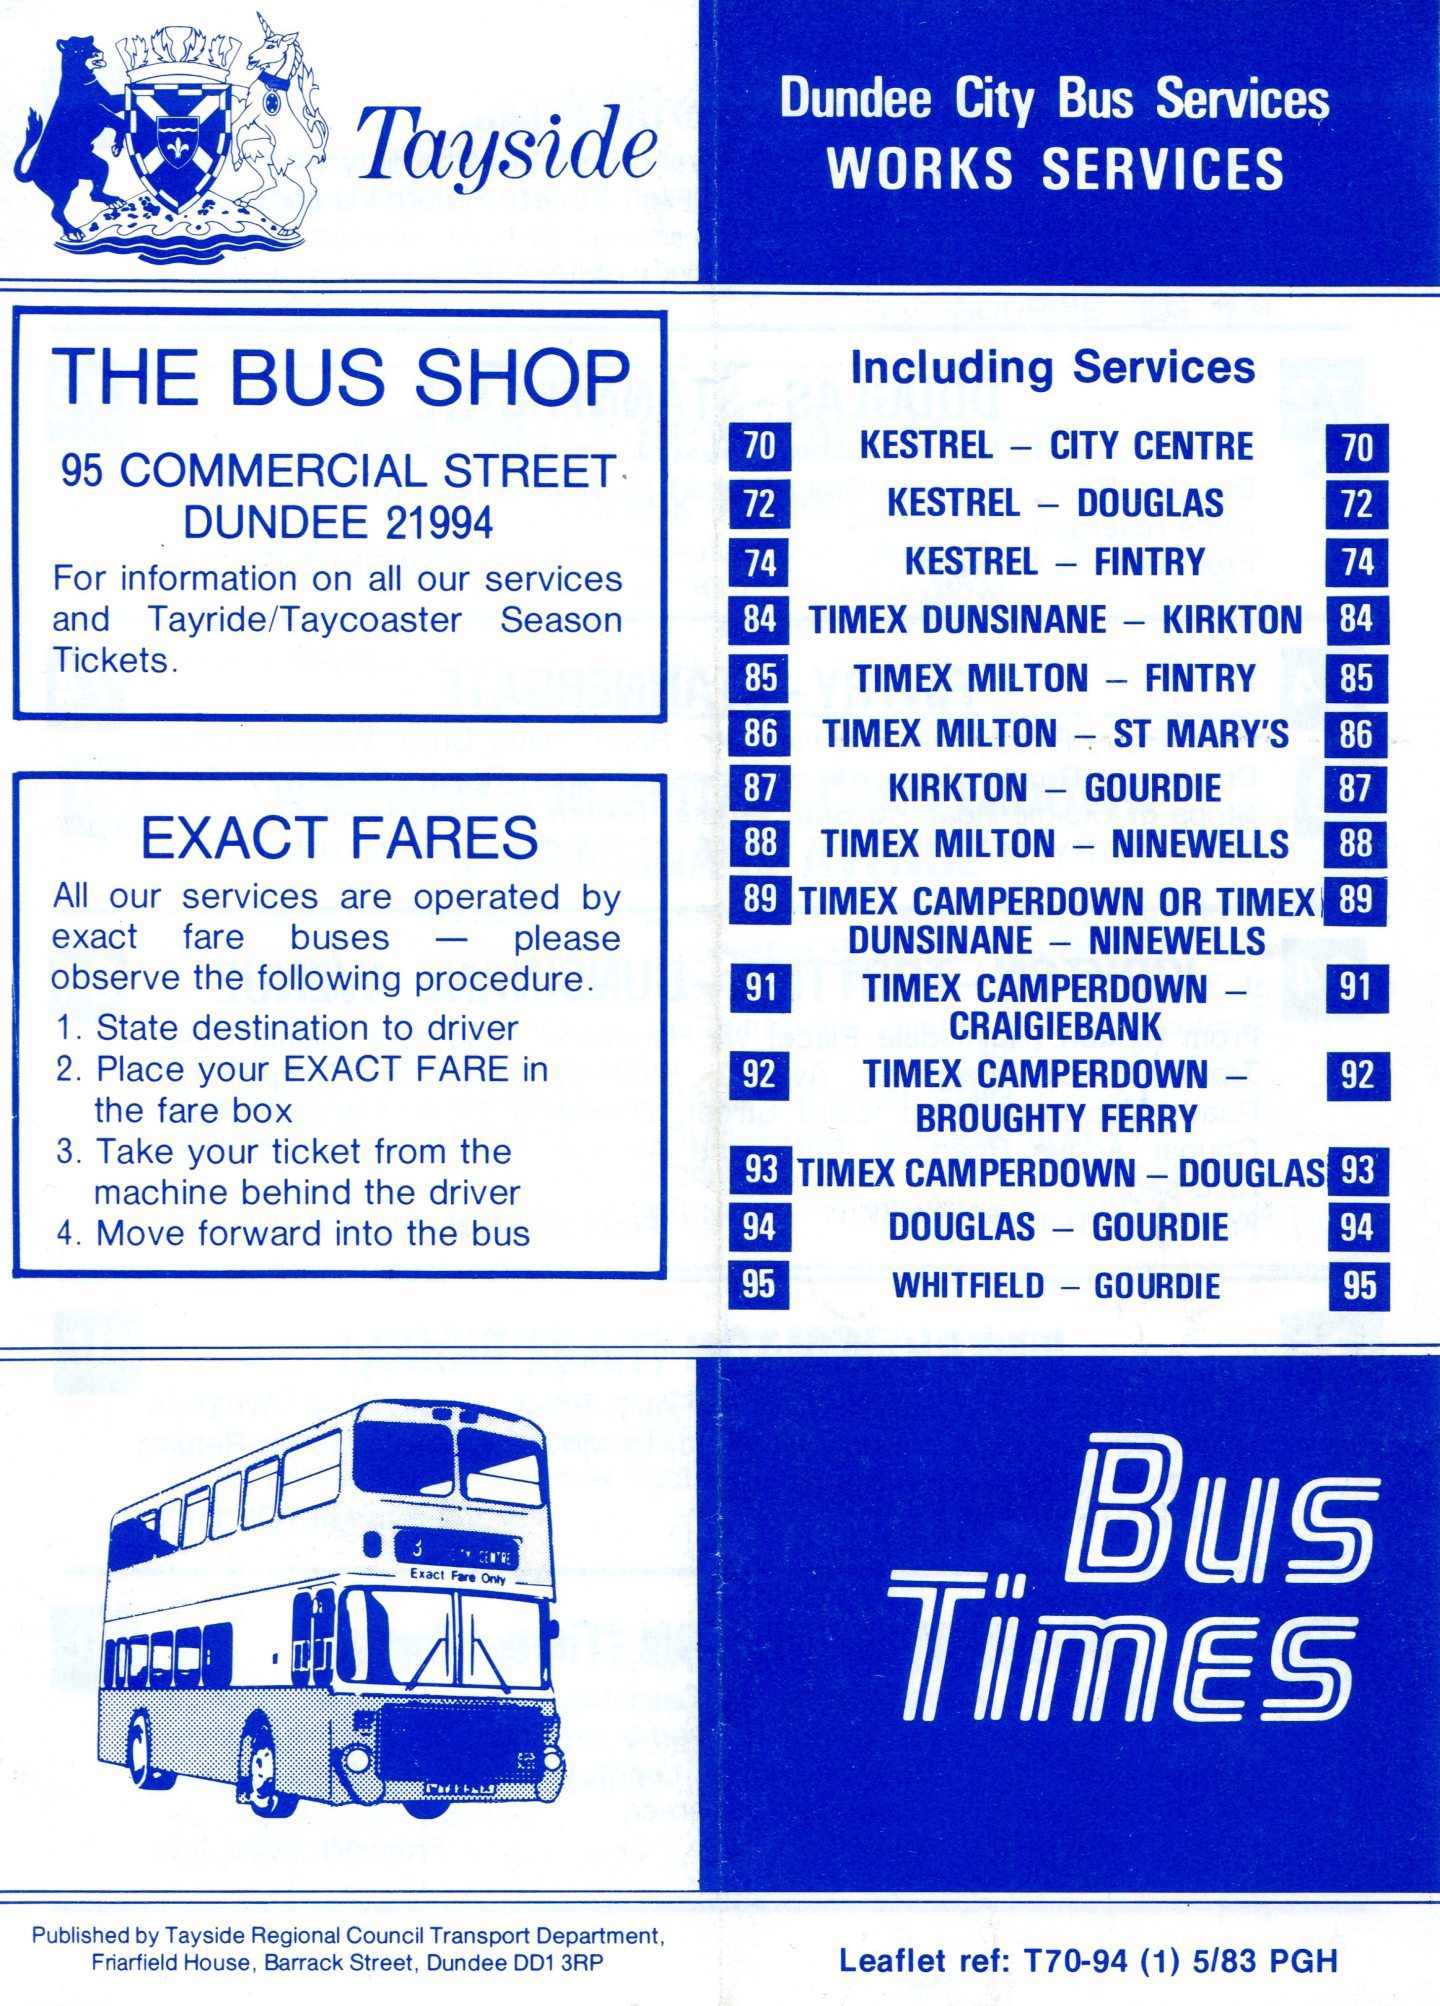 This Dundee bus timetable shows off some of the long-lost routes and businesses.